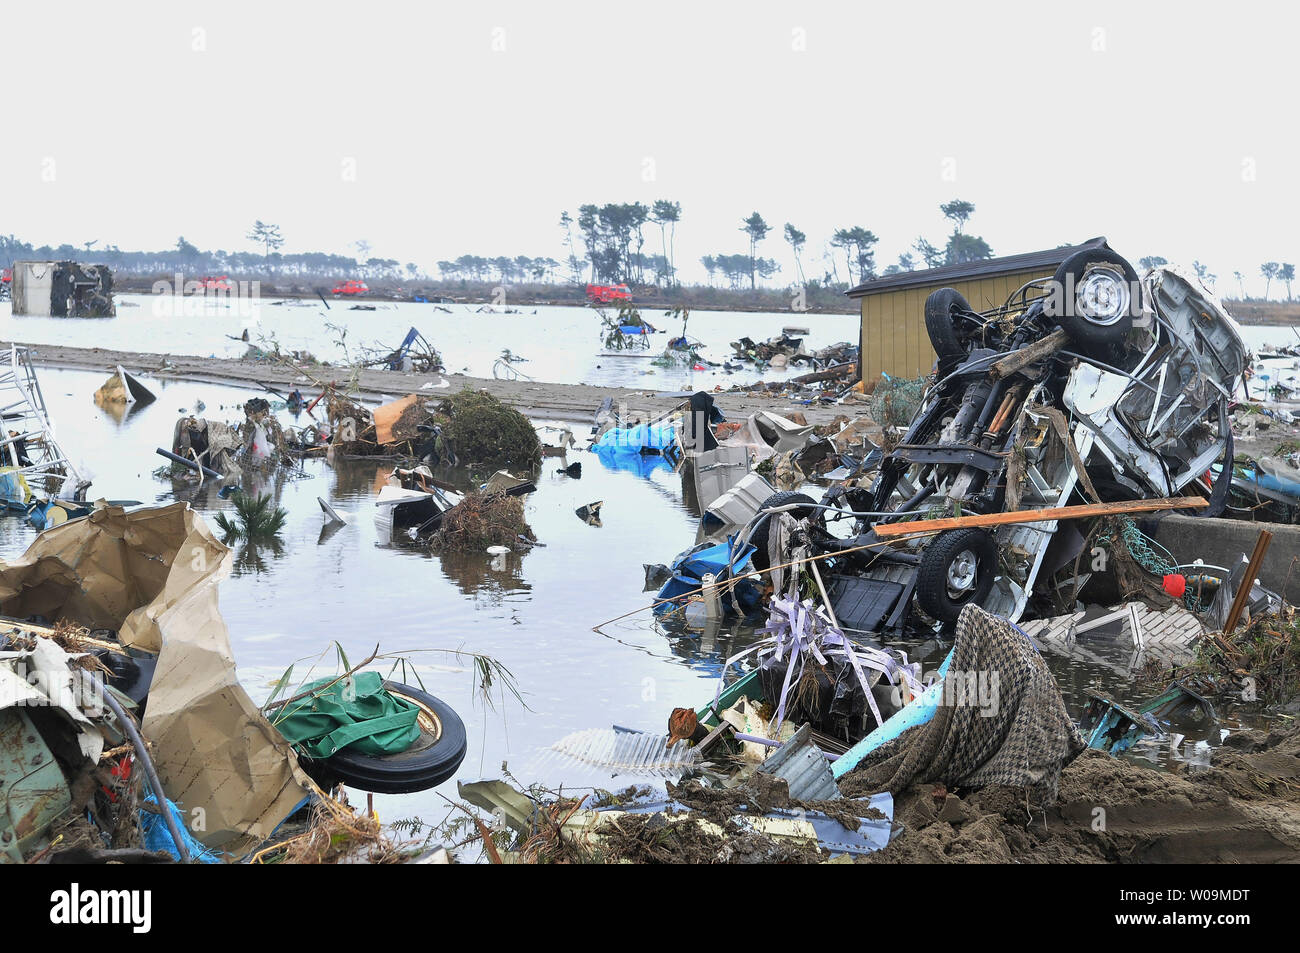 Destruction is seen in Sendai, Miyagi prefecture, Japan, on March 15, 2011.  More than 10,000 people are believed to have been killed by a massive earthquake and resulting tsunami.       UPI/Keizo Mori Stock Photo